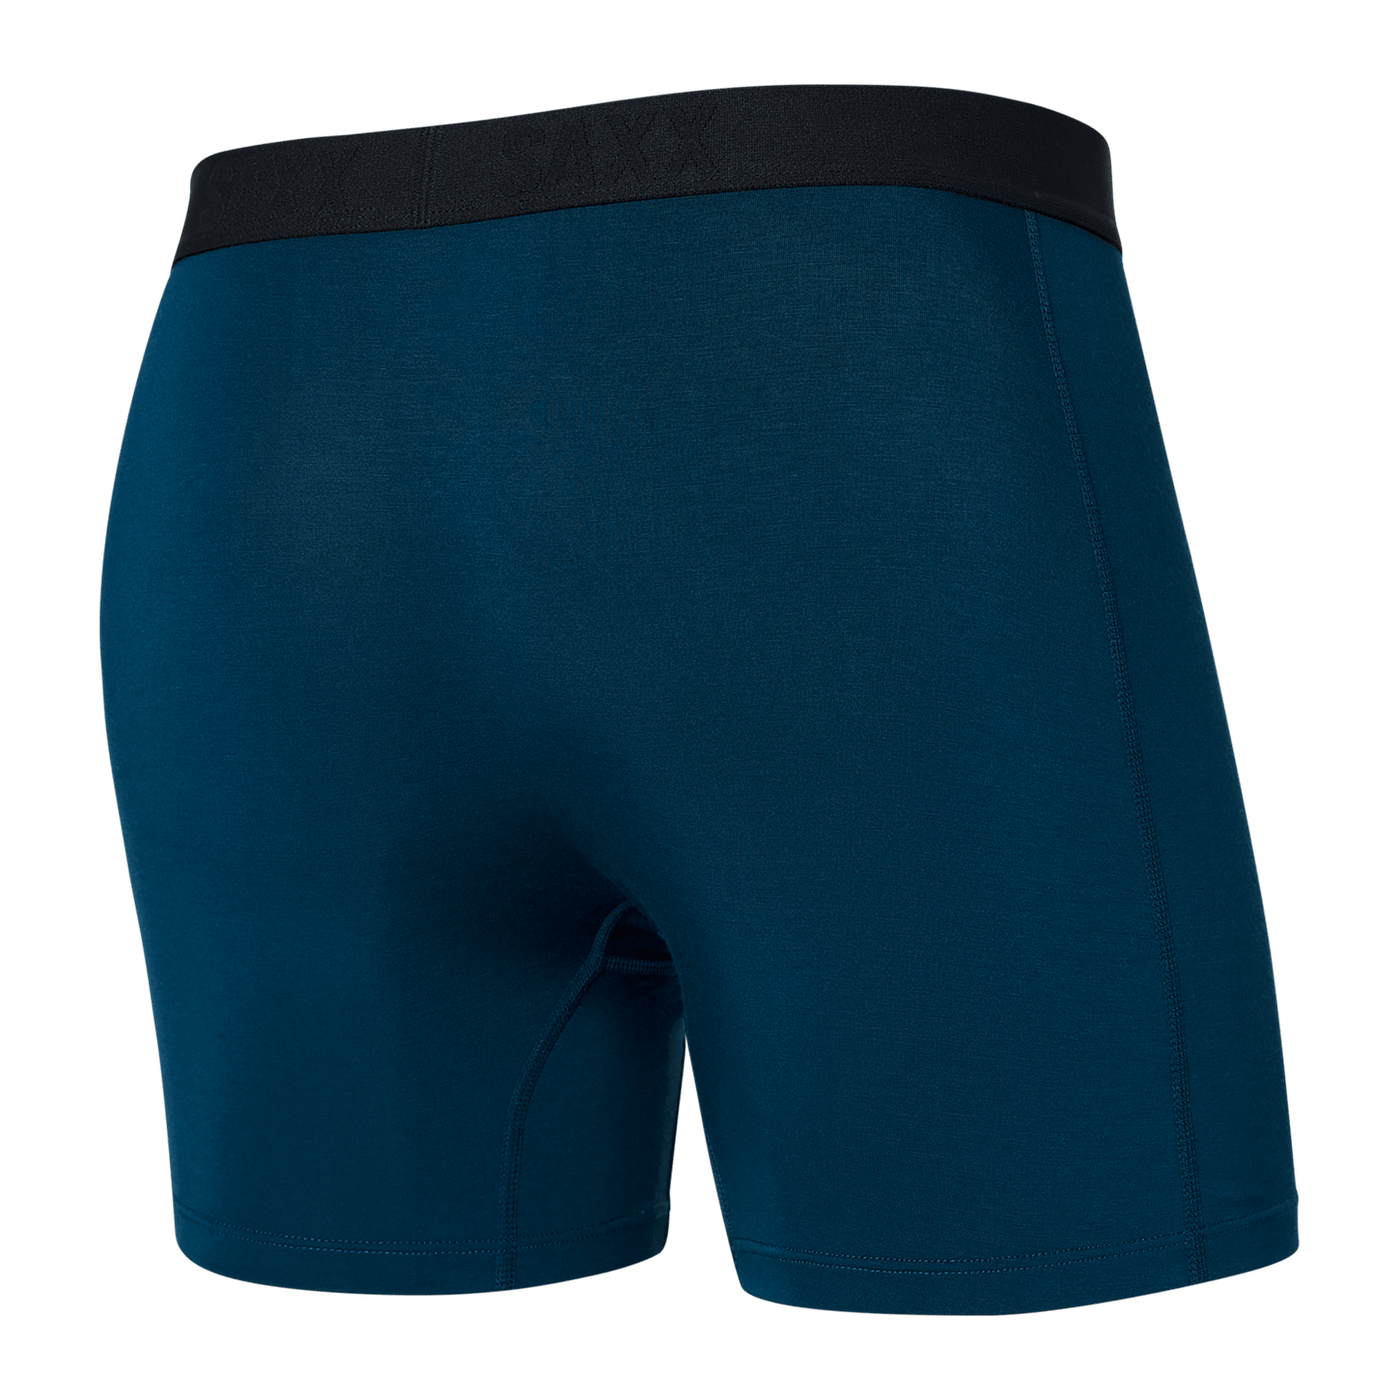 Saxx Vibe Boxers - Anchor Teal - The Hockey Shop Source For Sports